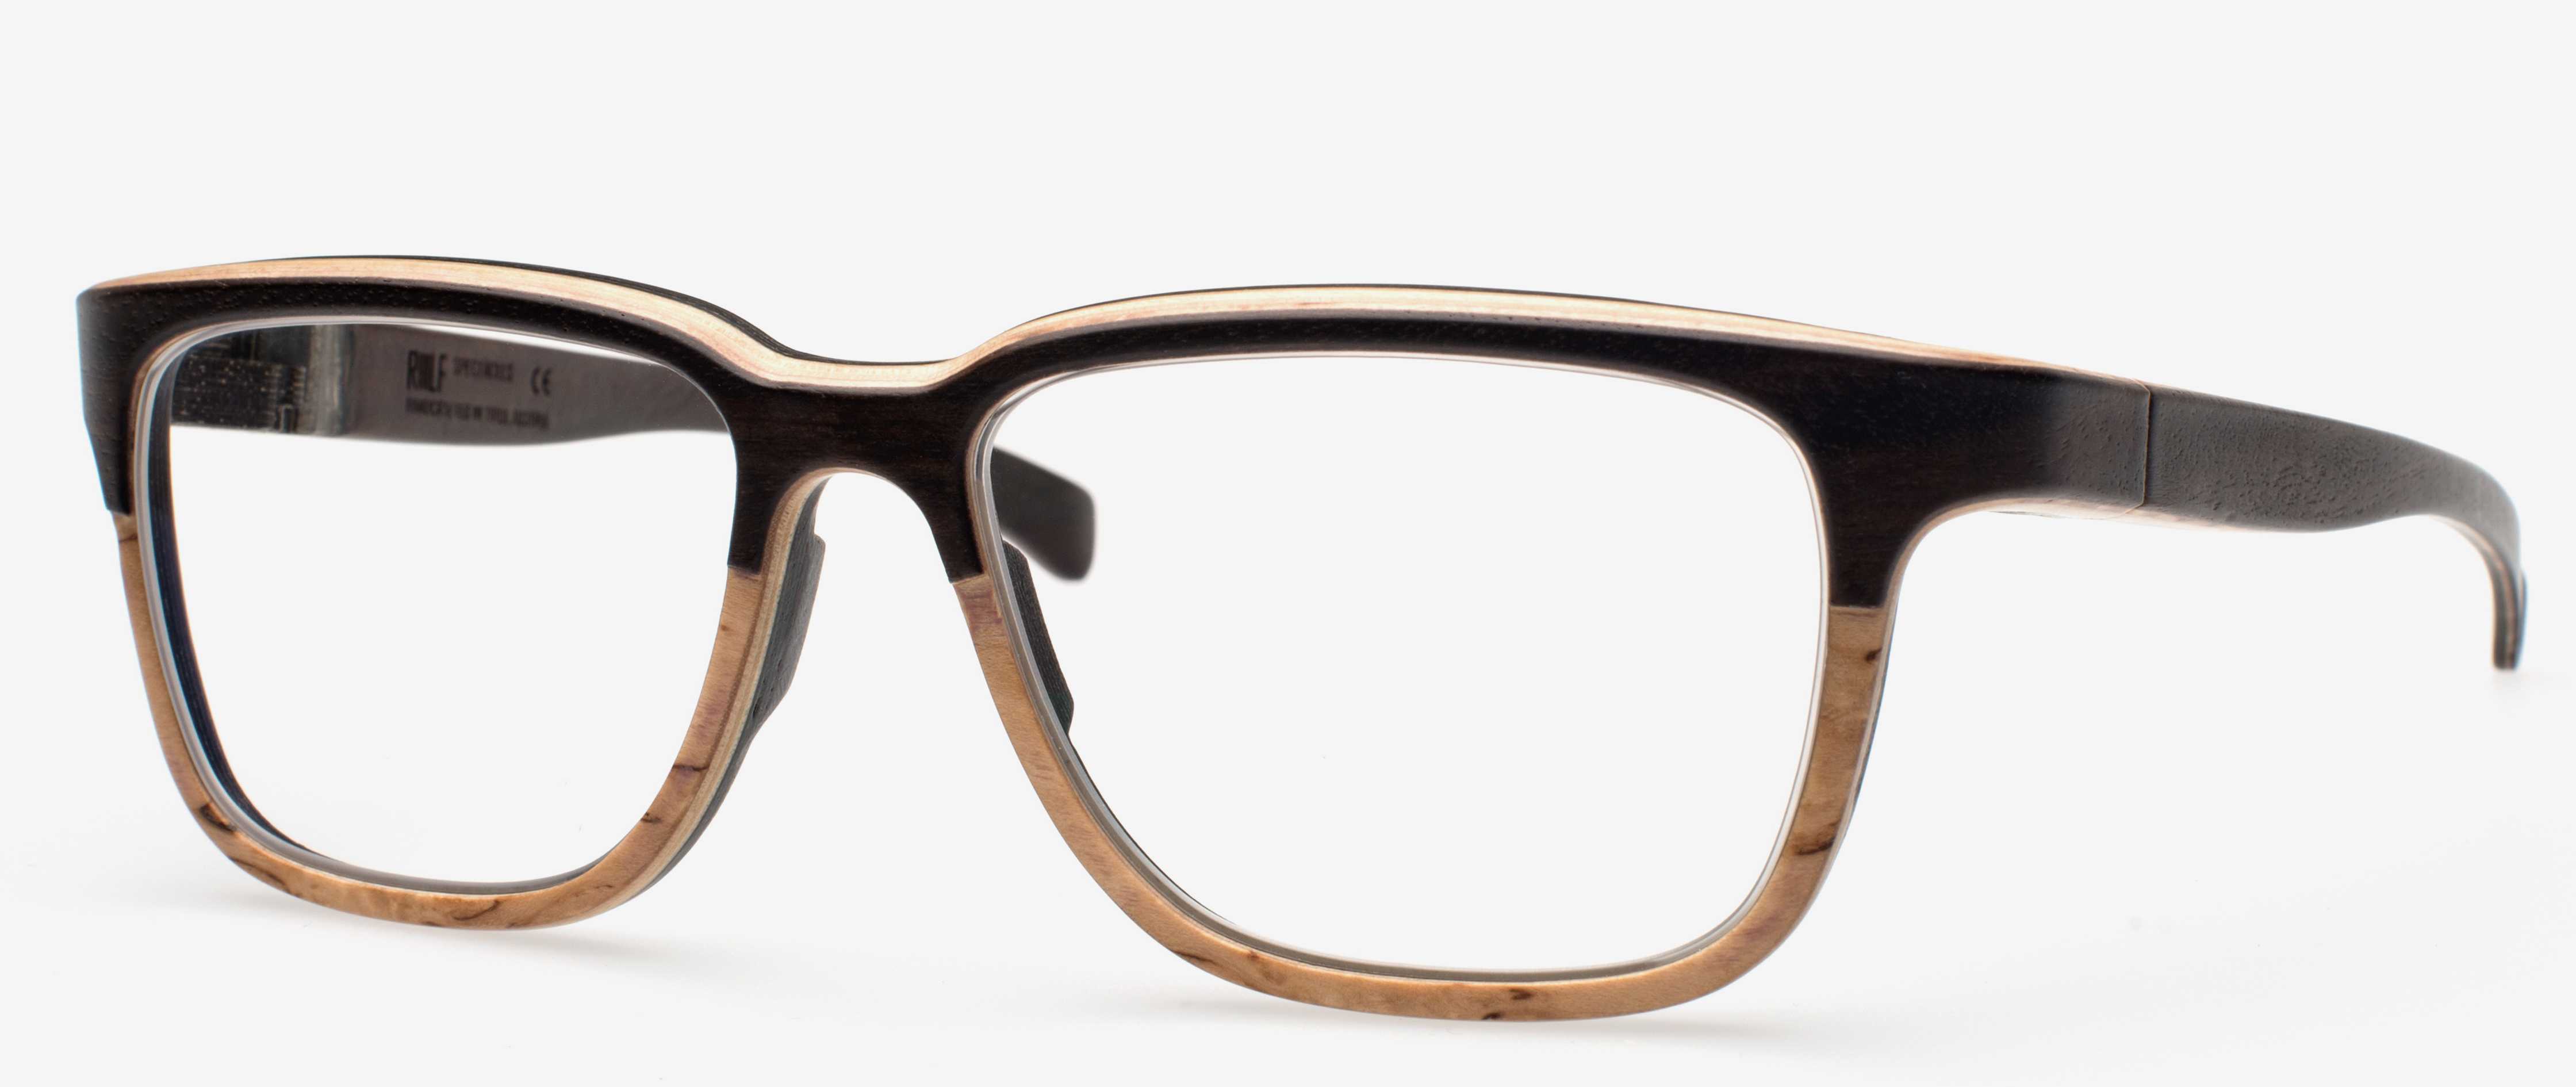 Wood frames with a gradient brown fade